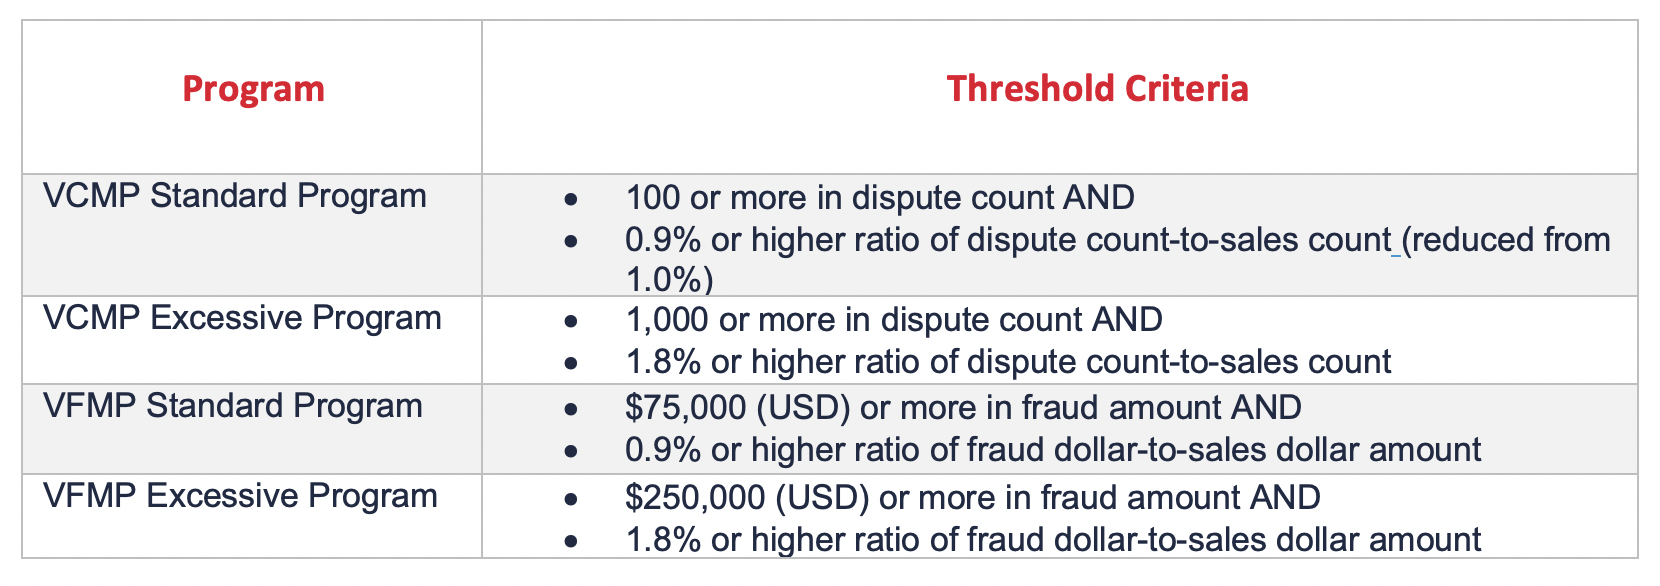 table showing visa's card brand thresholds